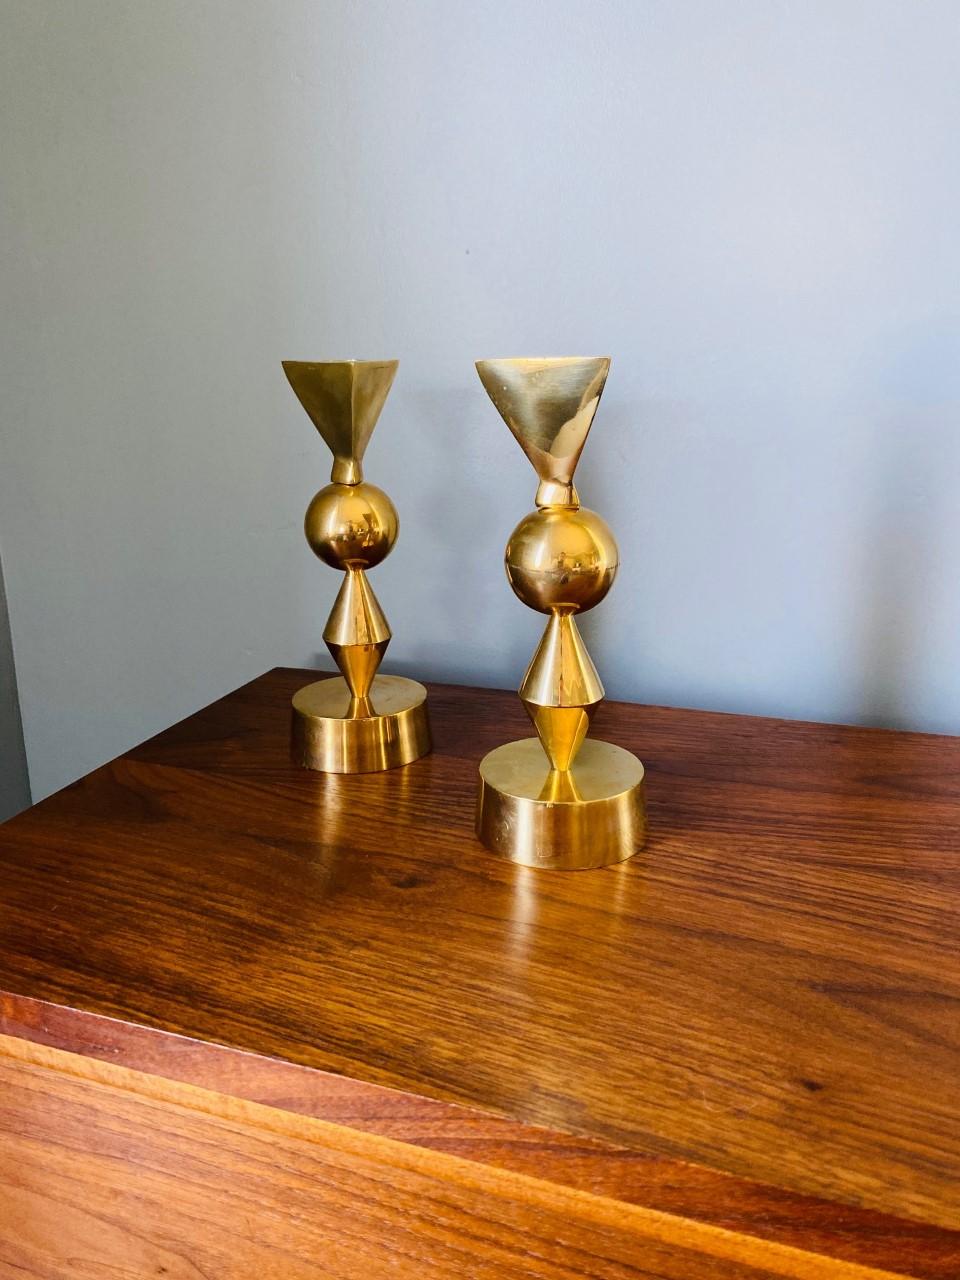 Stylish and incredibly modernist set of goldplated over brass candle holders in the style of Tommi Parzinger for Mueck-Cary. Elegant, with an undeniable silhouette that brings joyful midcentury design. Very unique and will add a special touch to